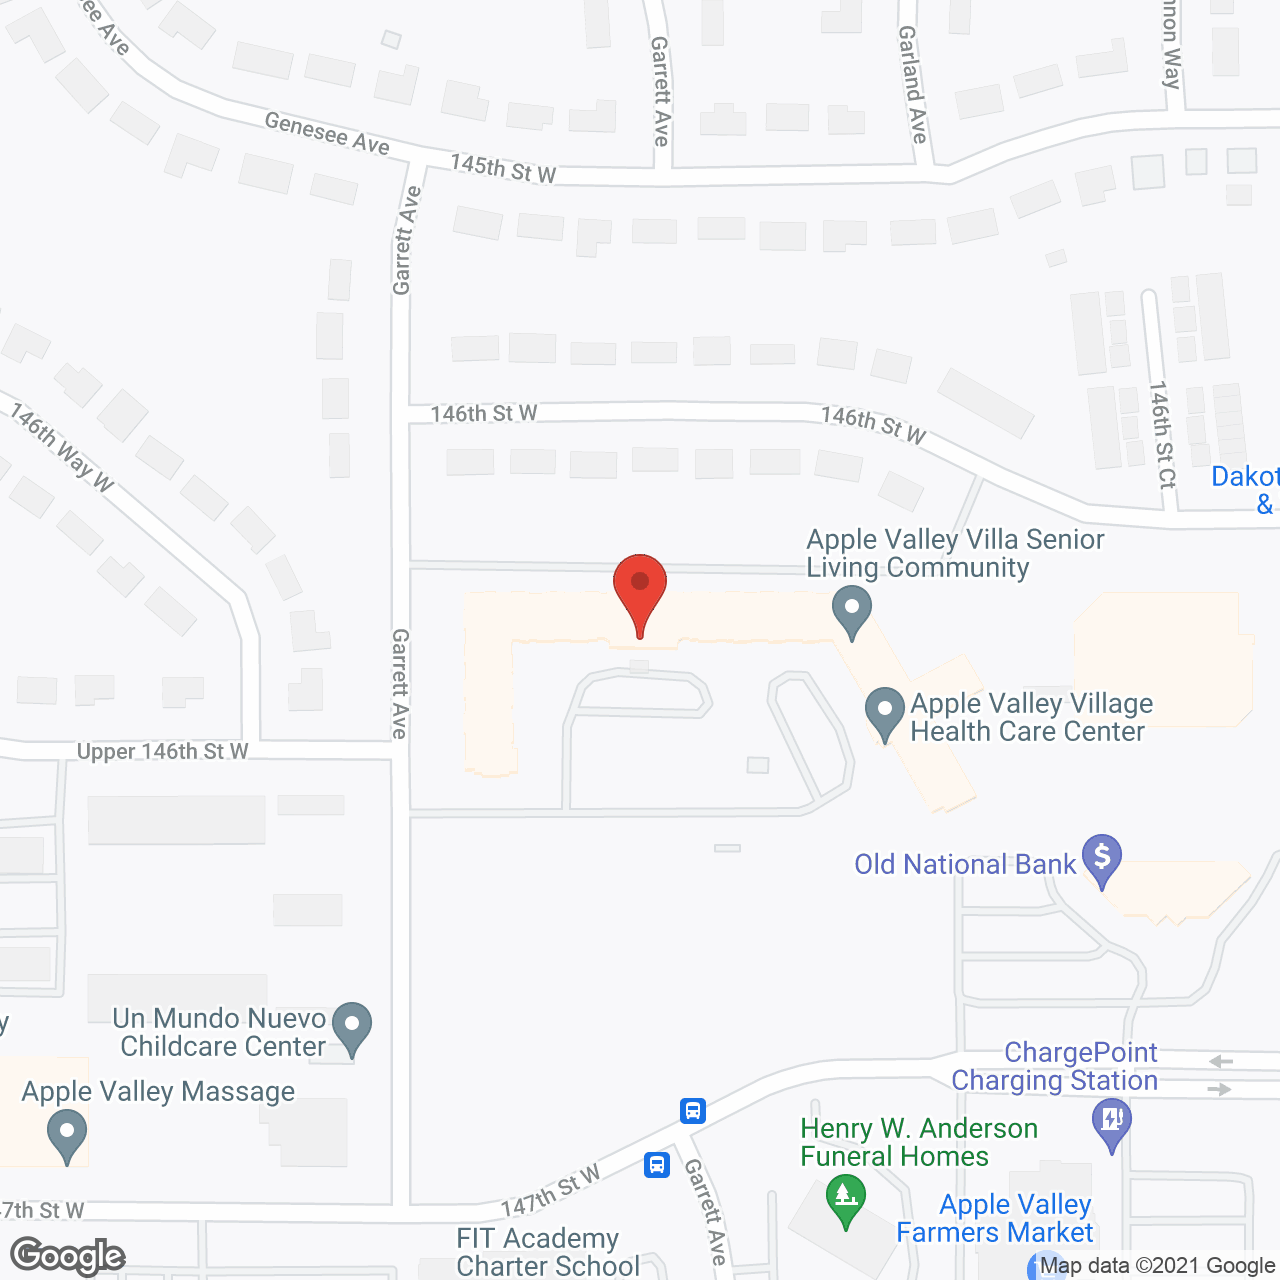 Apple Valley Campus in google map